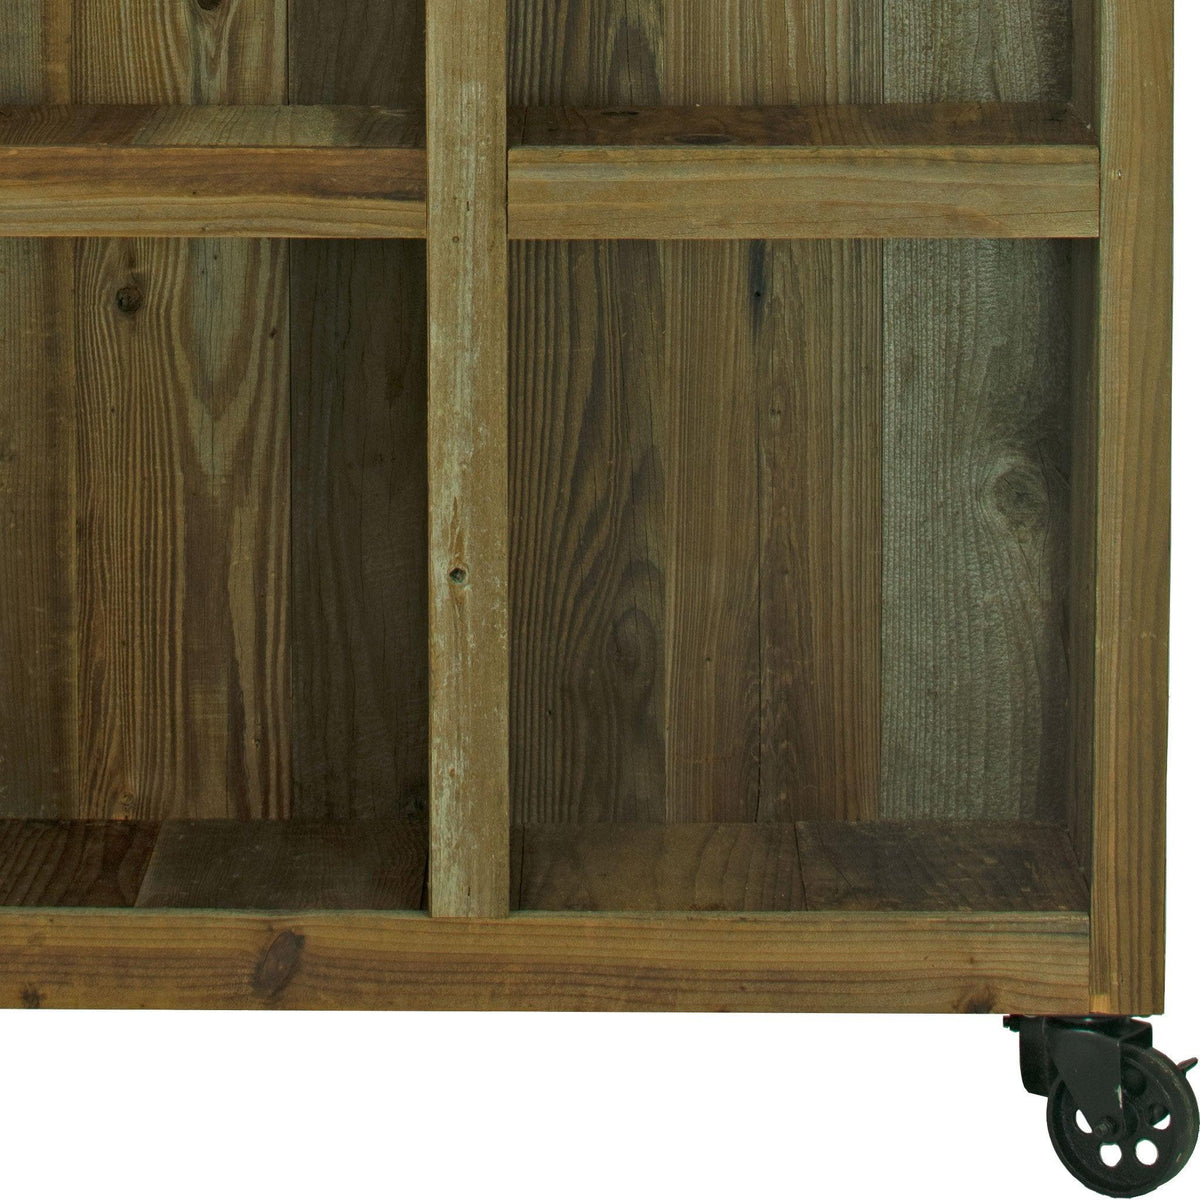 Bottom side closeup photo of Lee Display's brand new Outdoor Rolling Redwood Storage Cabinet with Wheels.  Shelving Unit with 5in Black Casters on sale at leedisplay.com